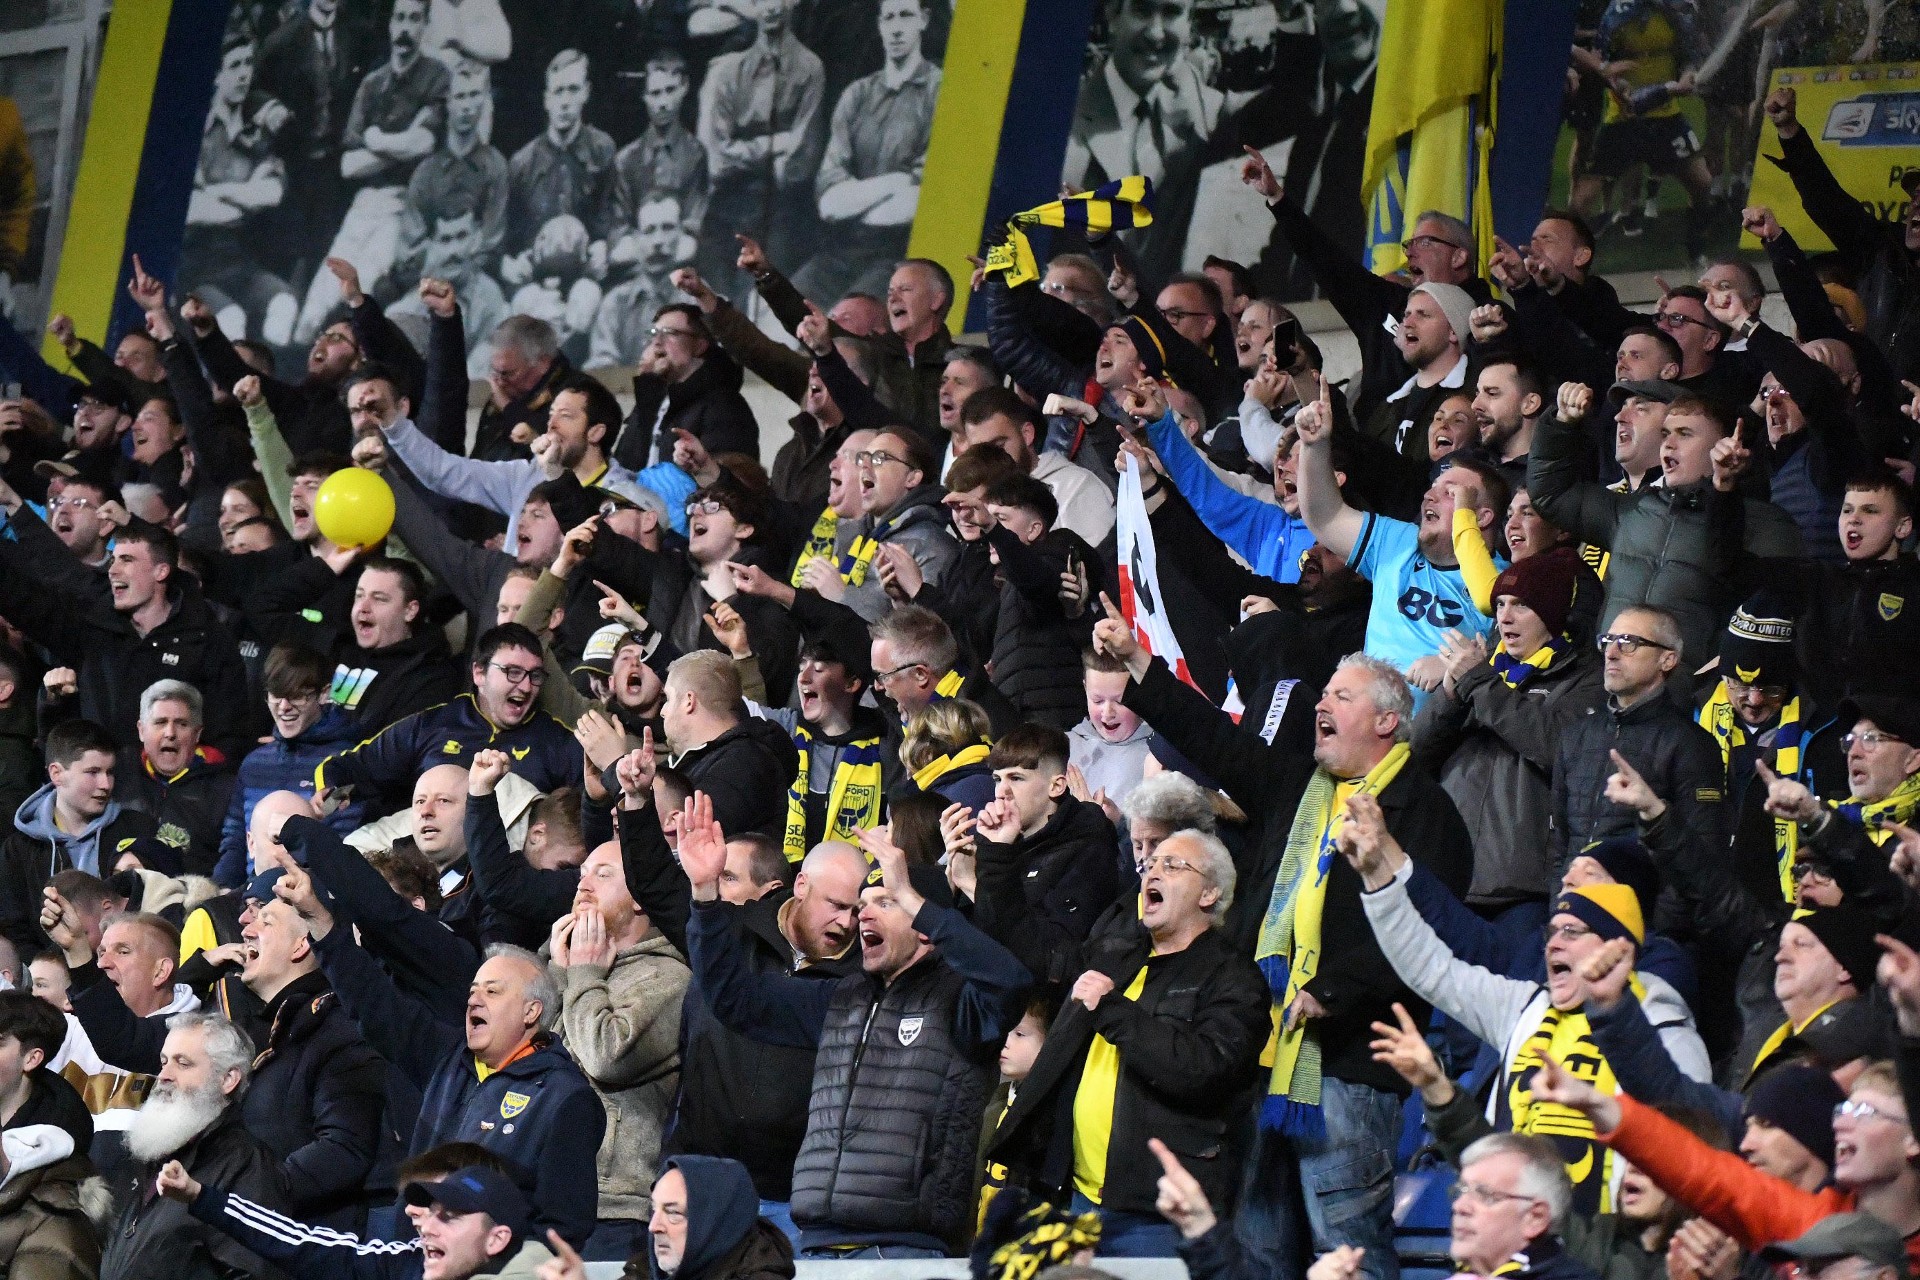 Oxford United fixture list assessed by Supporters’ Panel